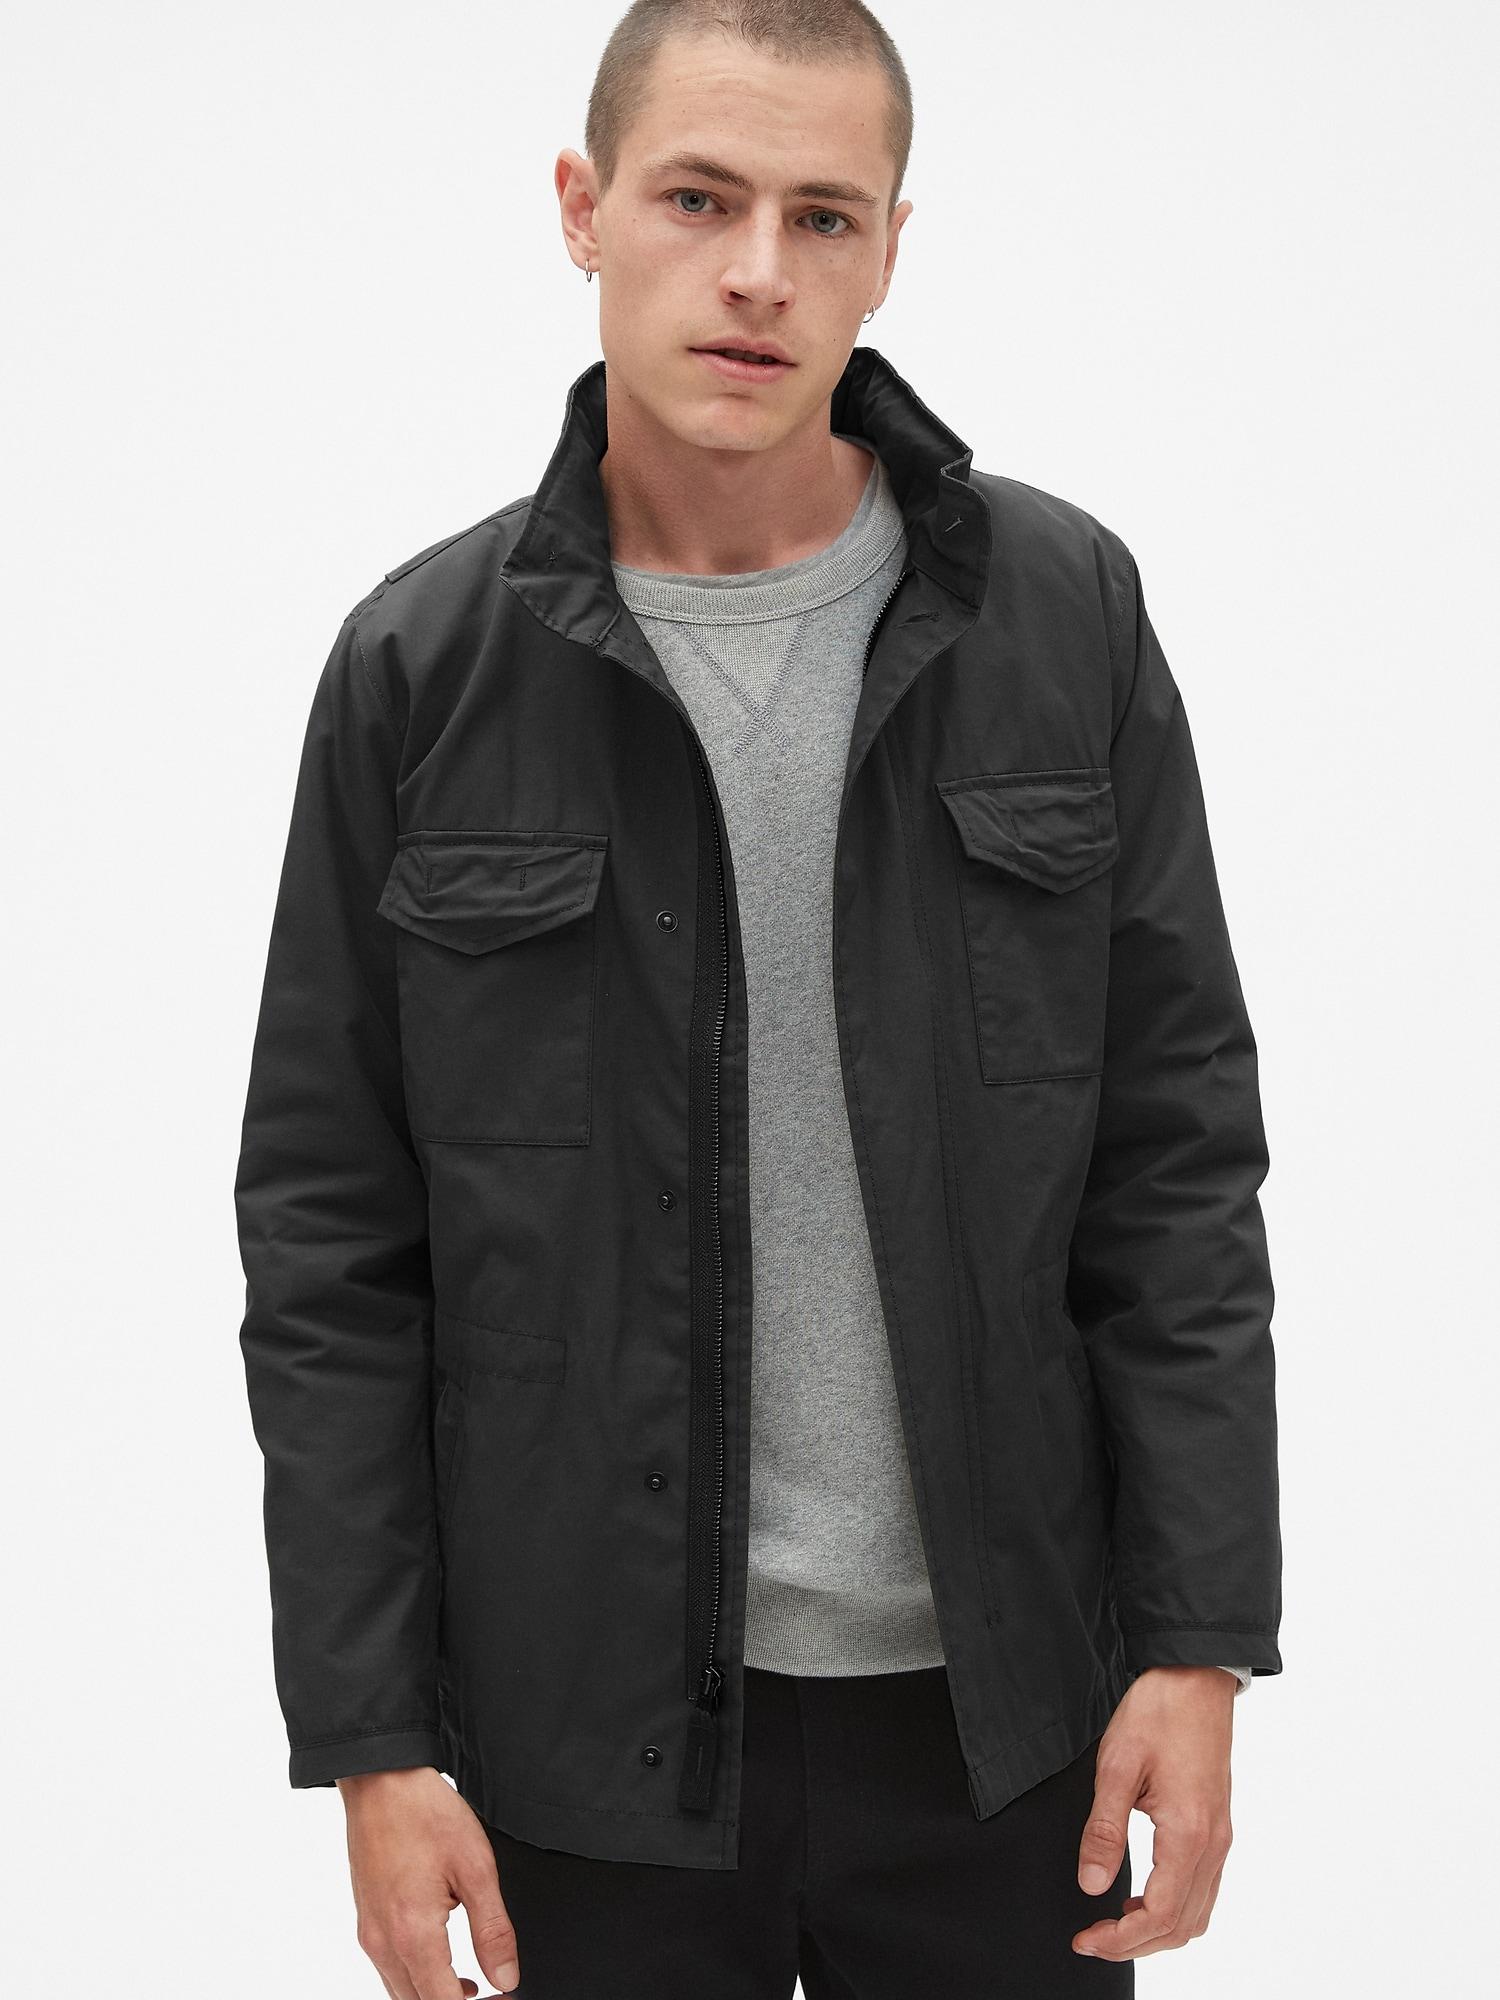 Gap Waxed Military Jacket in Black for 